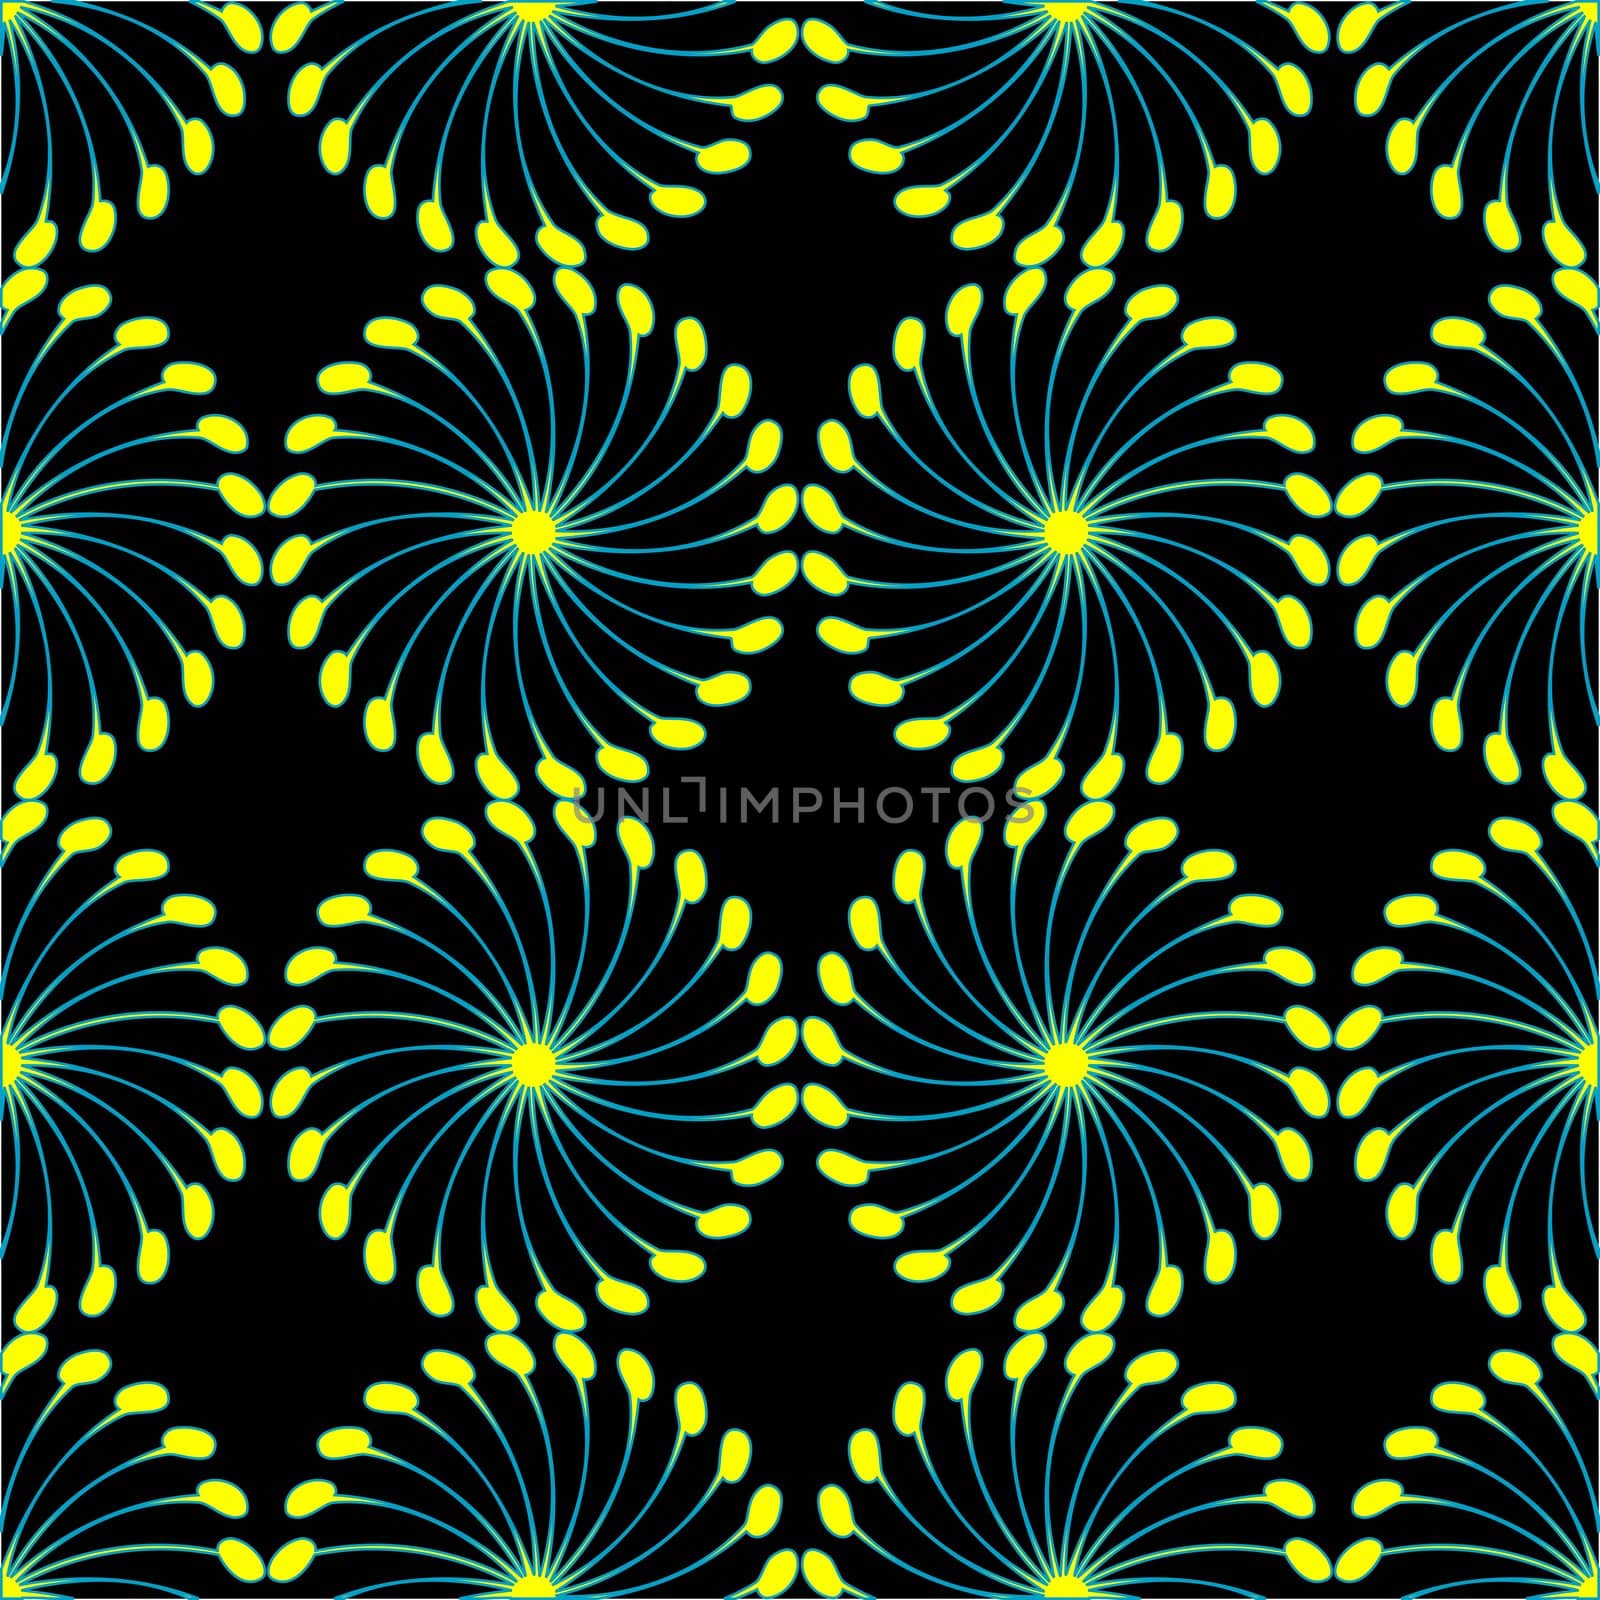 paper wind mill pattern black and yellow, vector art illustration